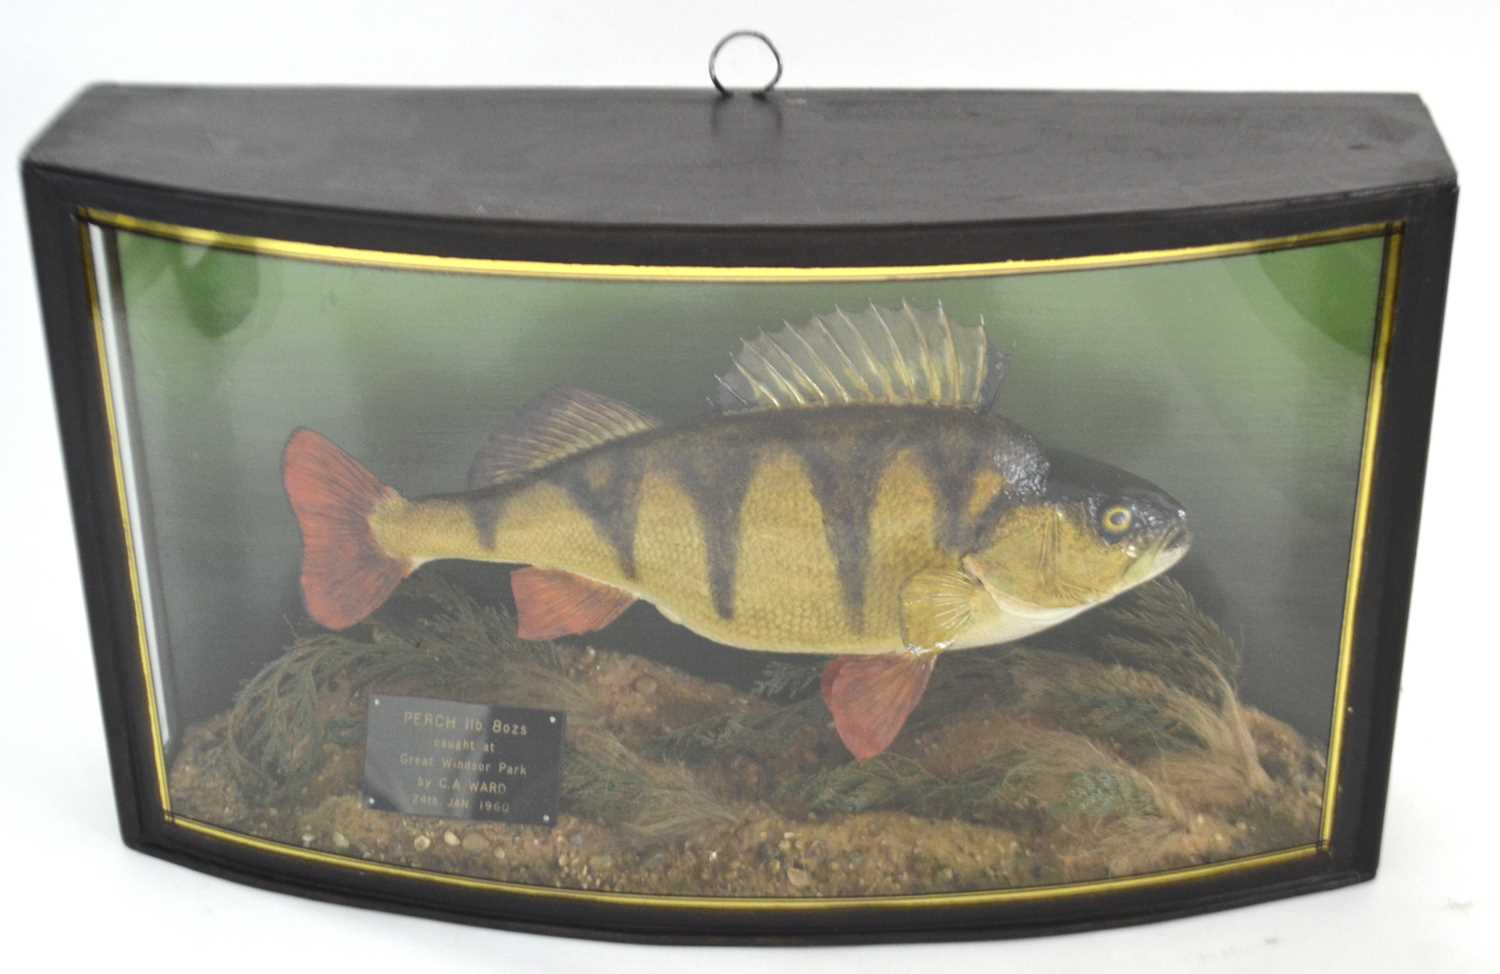 20th Century taxidermy cased Perch, set in naturalistic setting with bow front glass case with - Image 4 of 4